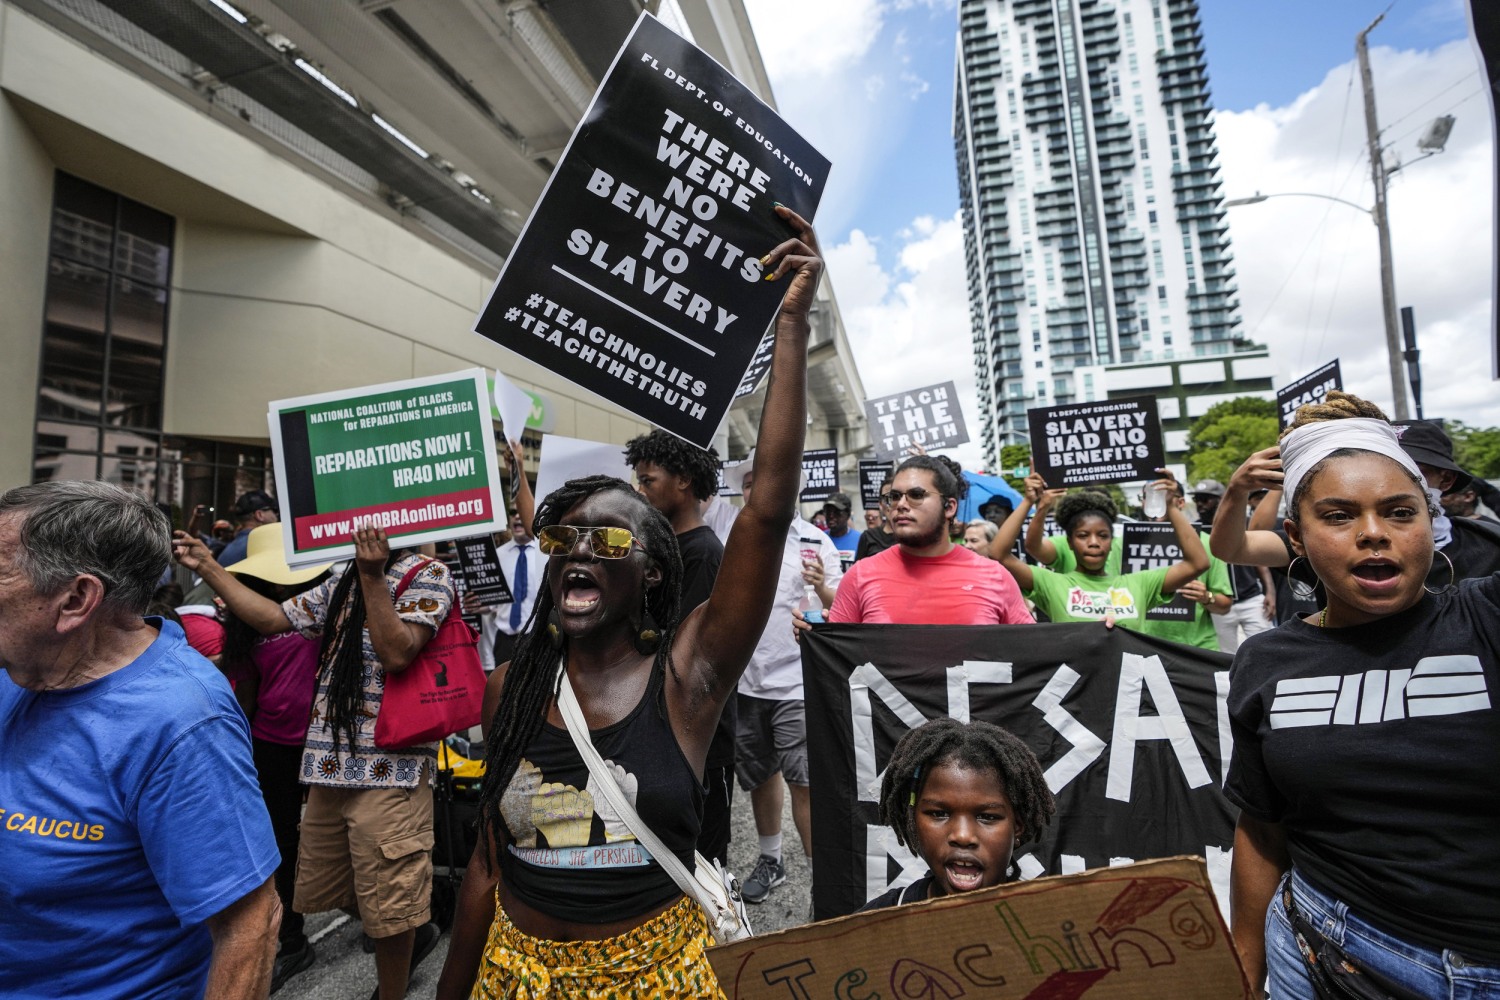 Protesters march through Miami to object to Florida's Black history  teaching standards